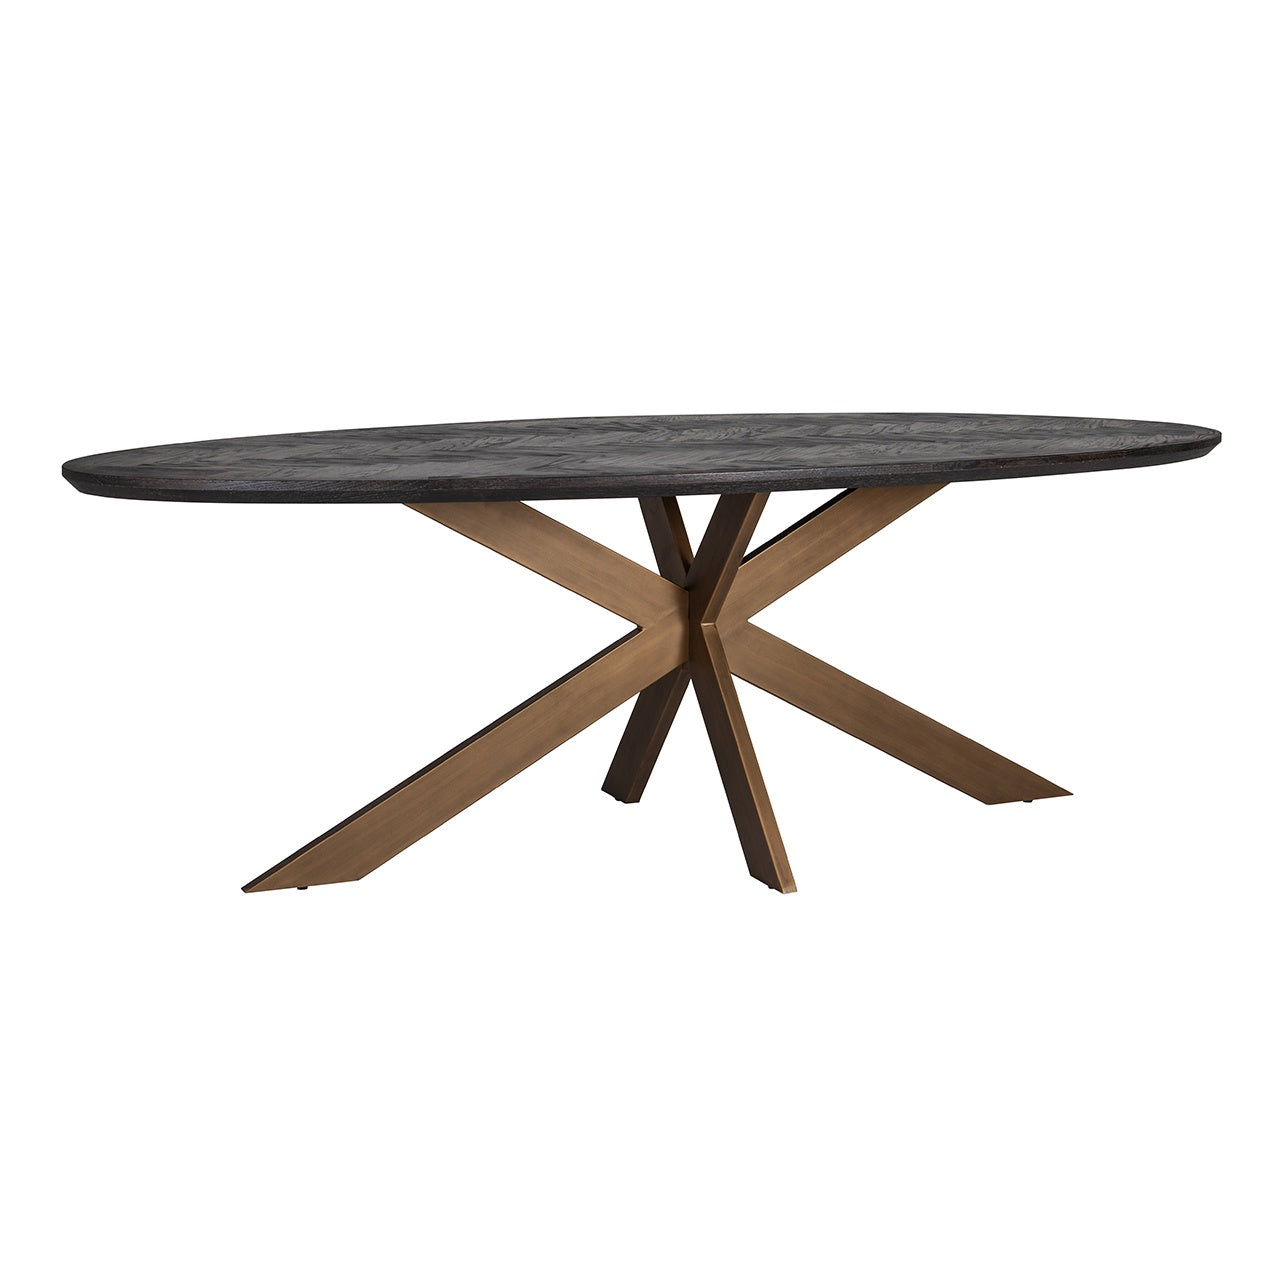 Arundel Brass Oval Dining Table - Pavilion Interiors